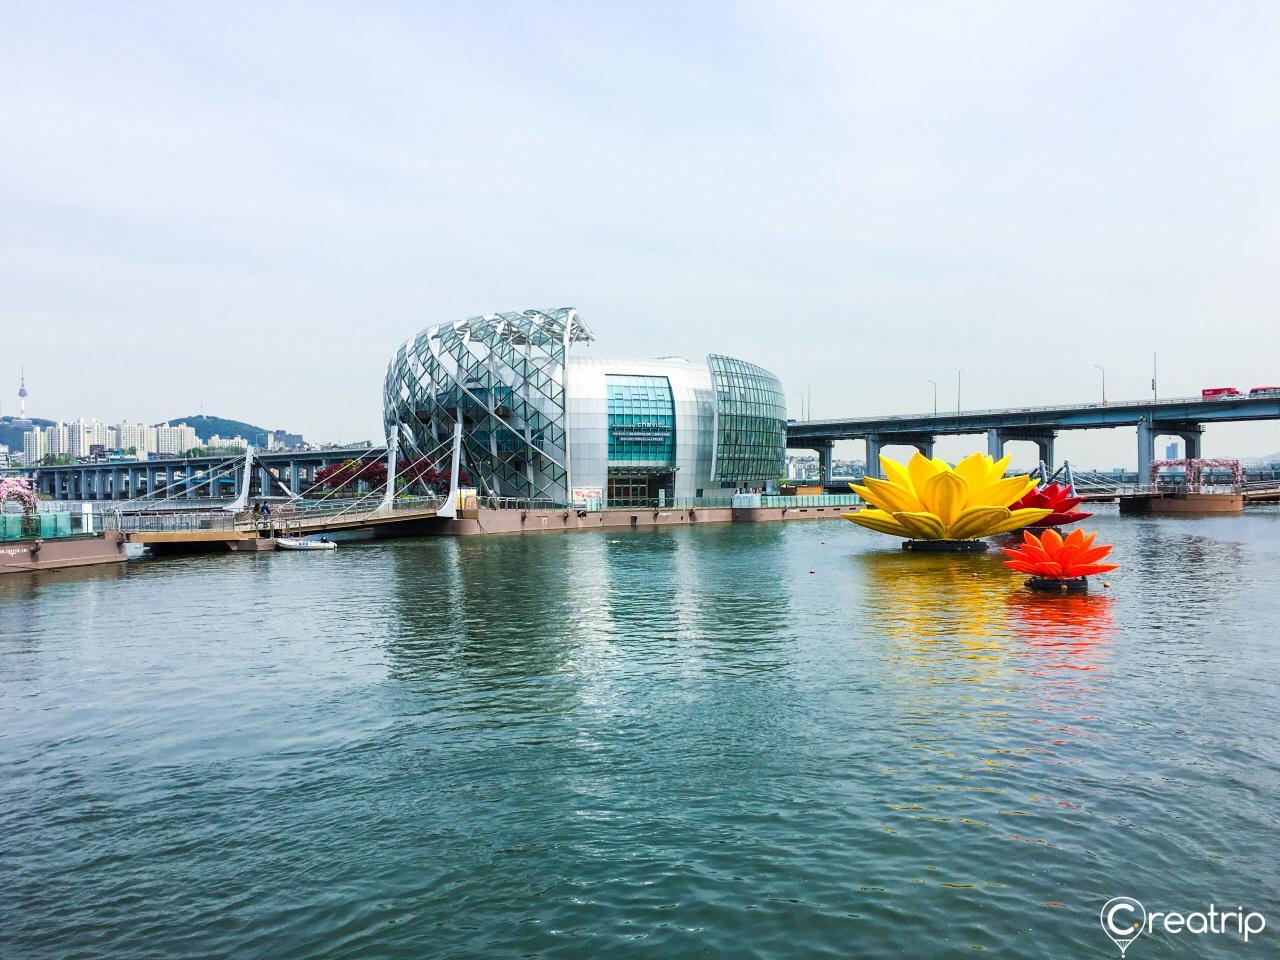 A panoramic view of the vibrant city of Seoul with landmarks like Sebit Island, towering buildings, and a serene lake surrounded by flowers. The sky is clear and blue with white clouds. Vehicles and people are enjoying leisure and recreation.